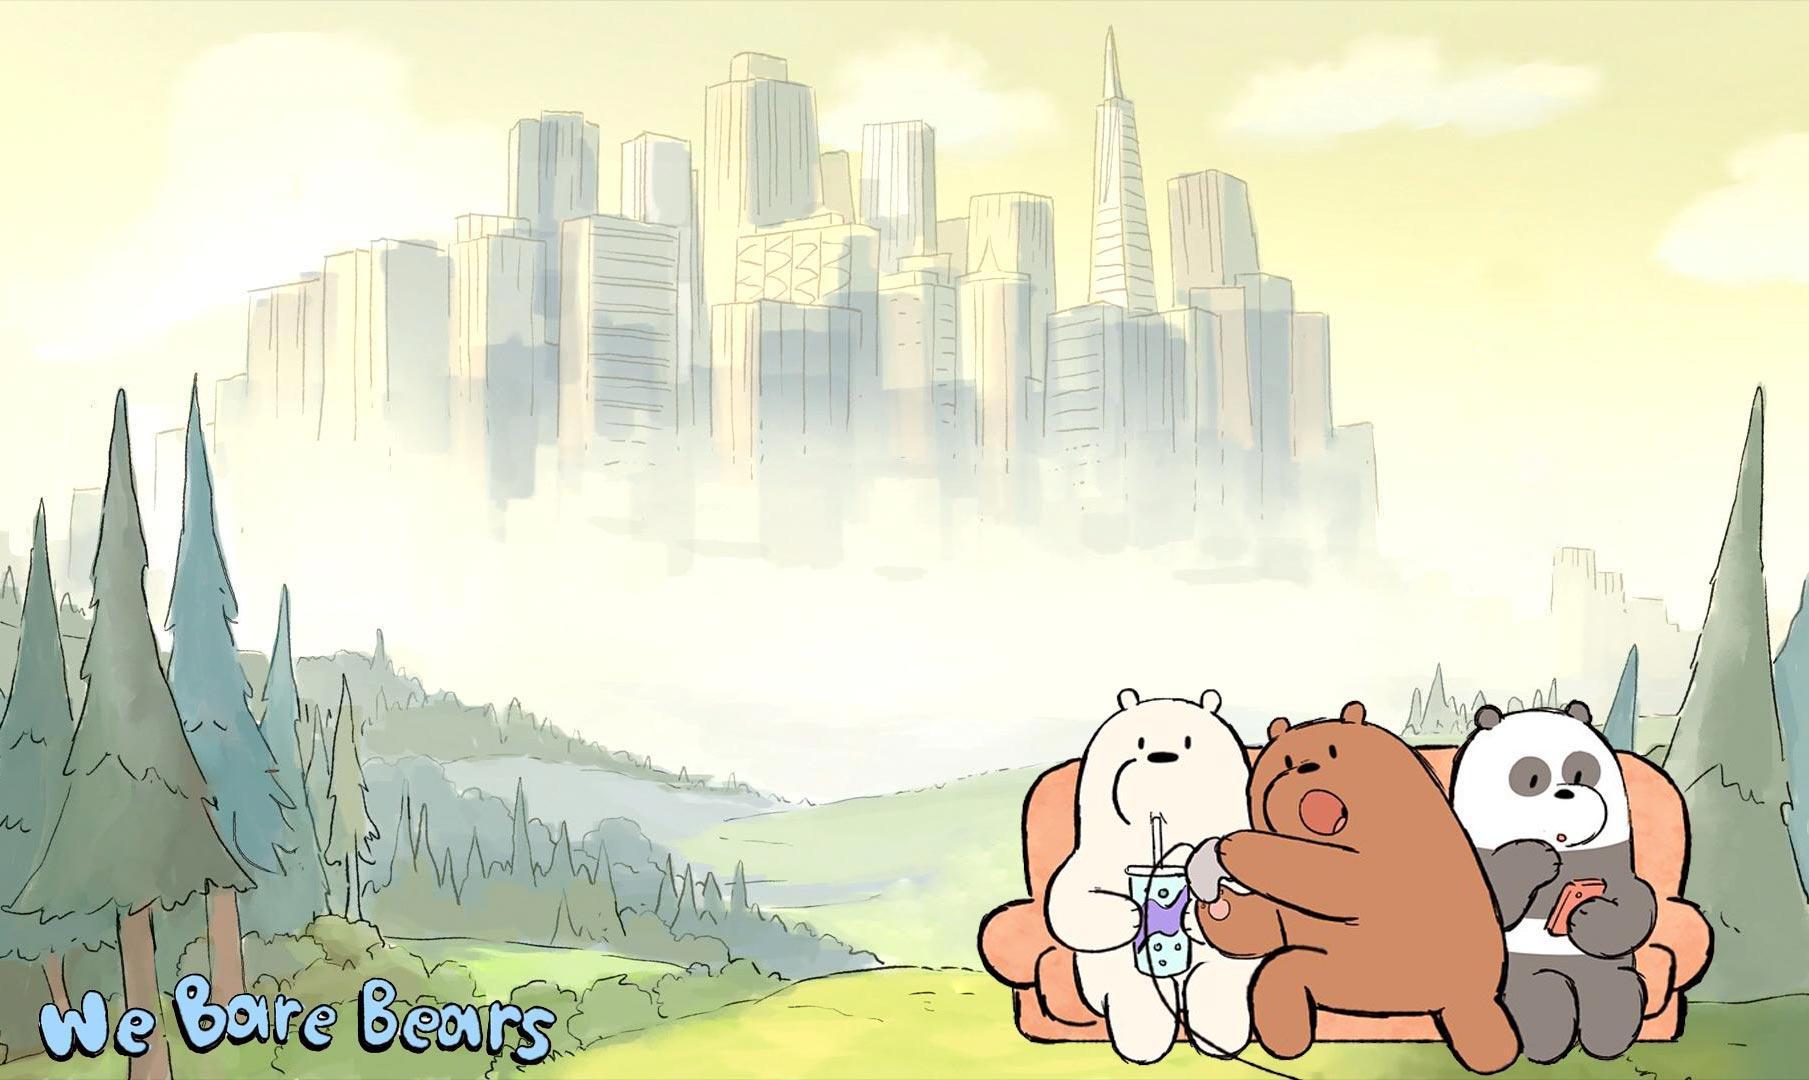 We Bare Bears Cartoon Wallpapers Hd Desktop And Mobile Backgrounds.